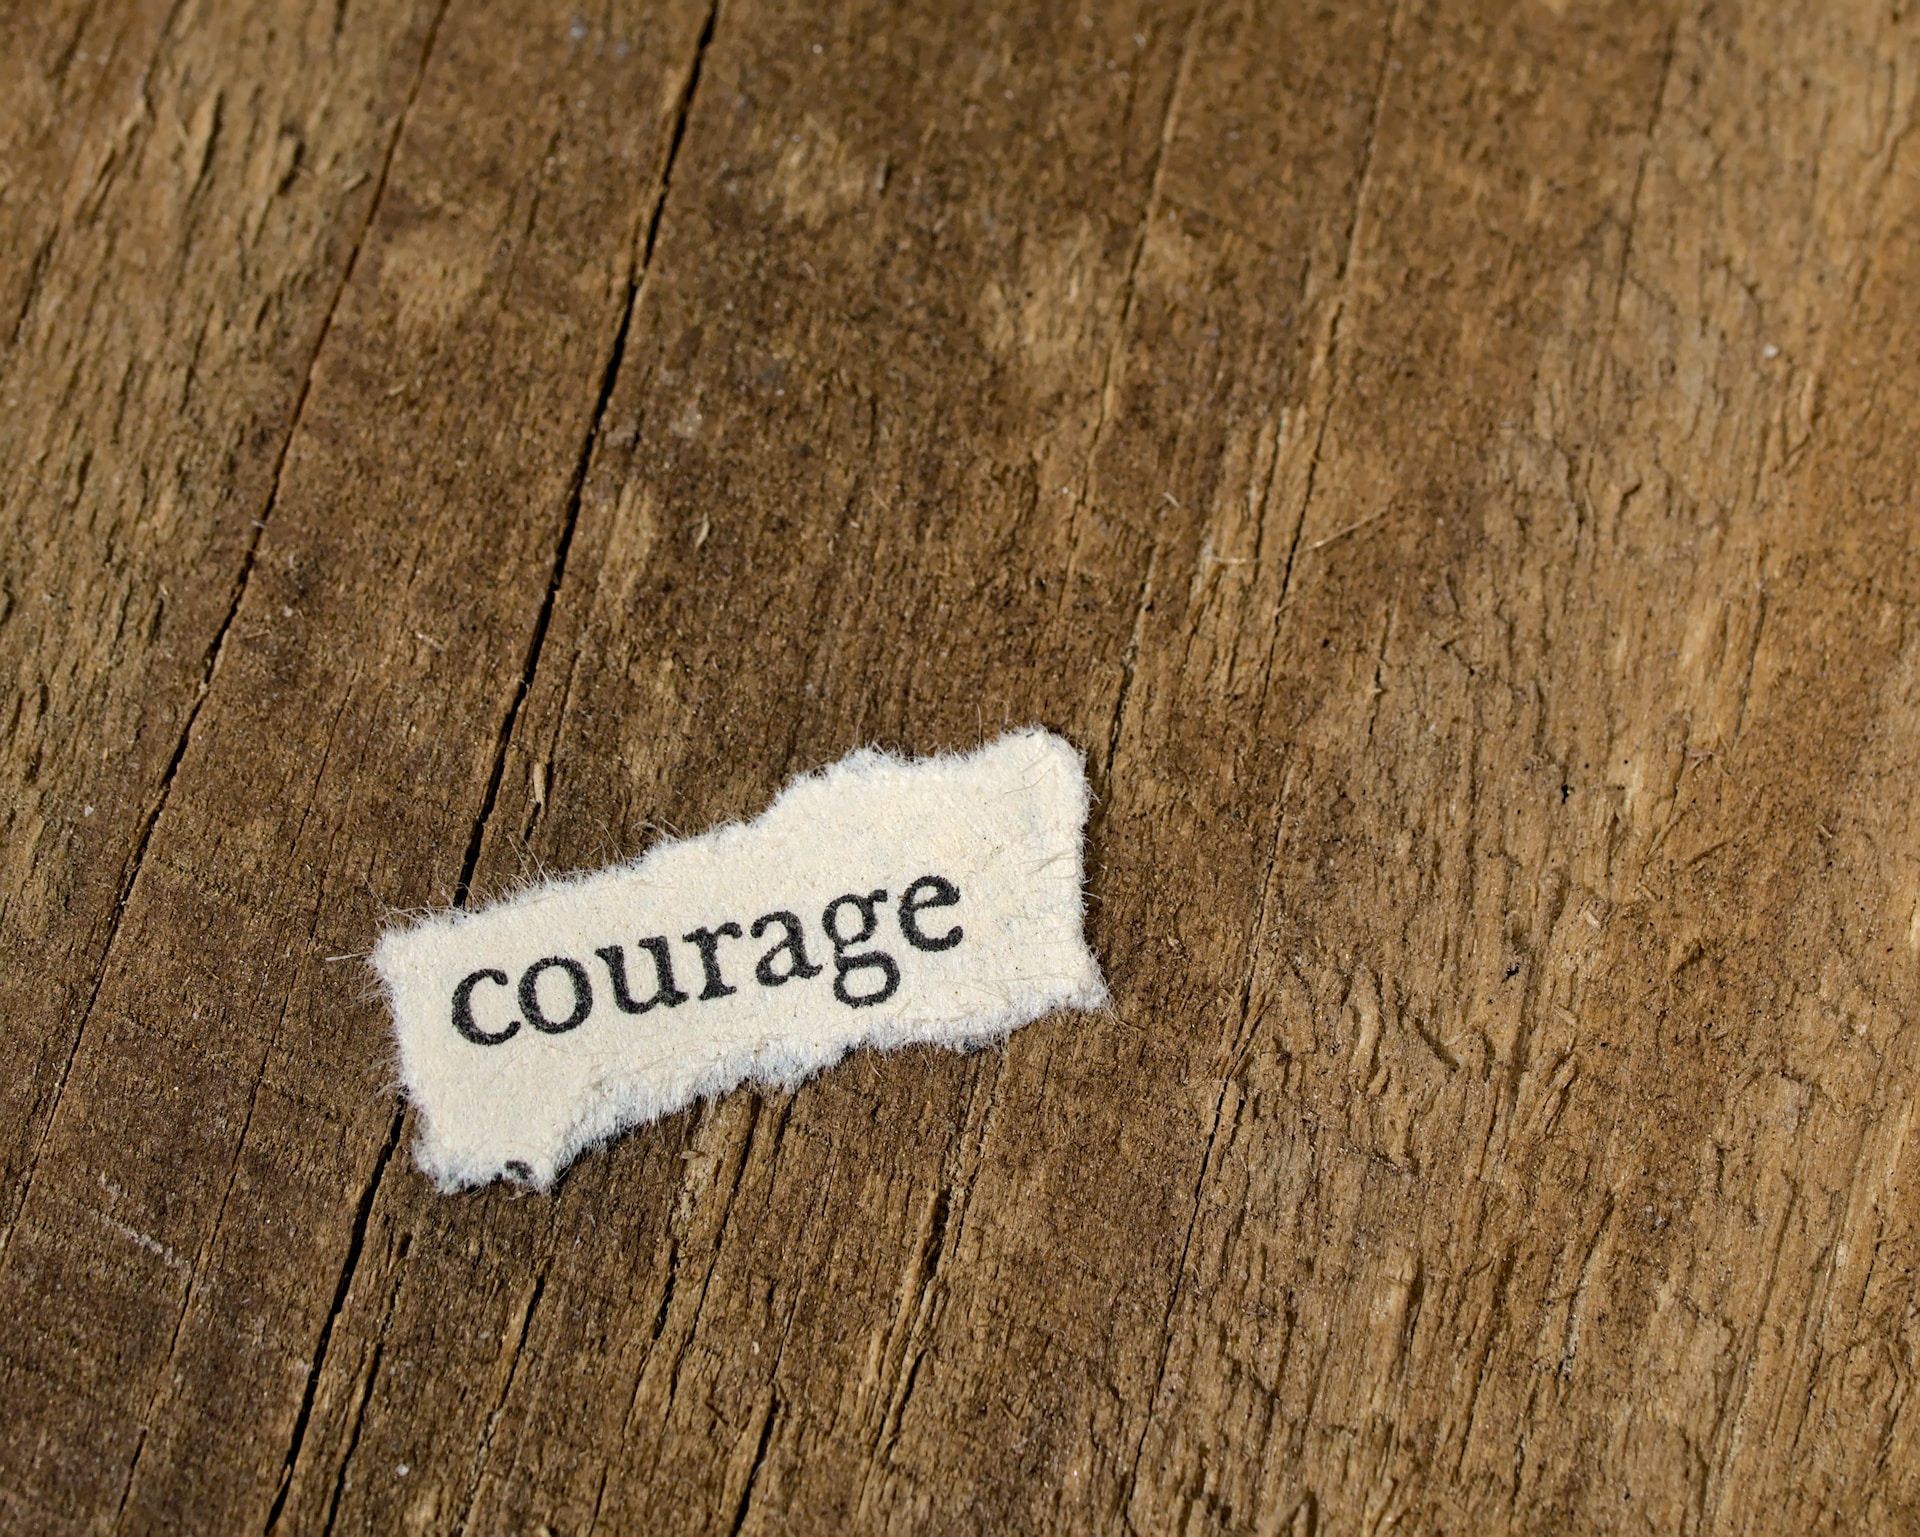 courage, giving up, bravery, societal myths, heroic act, understanding courage, facets of courage, surrender, redefine bravery, emotional courage, unconventional courage